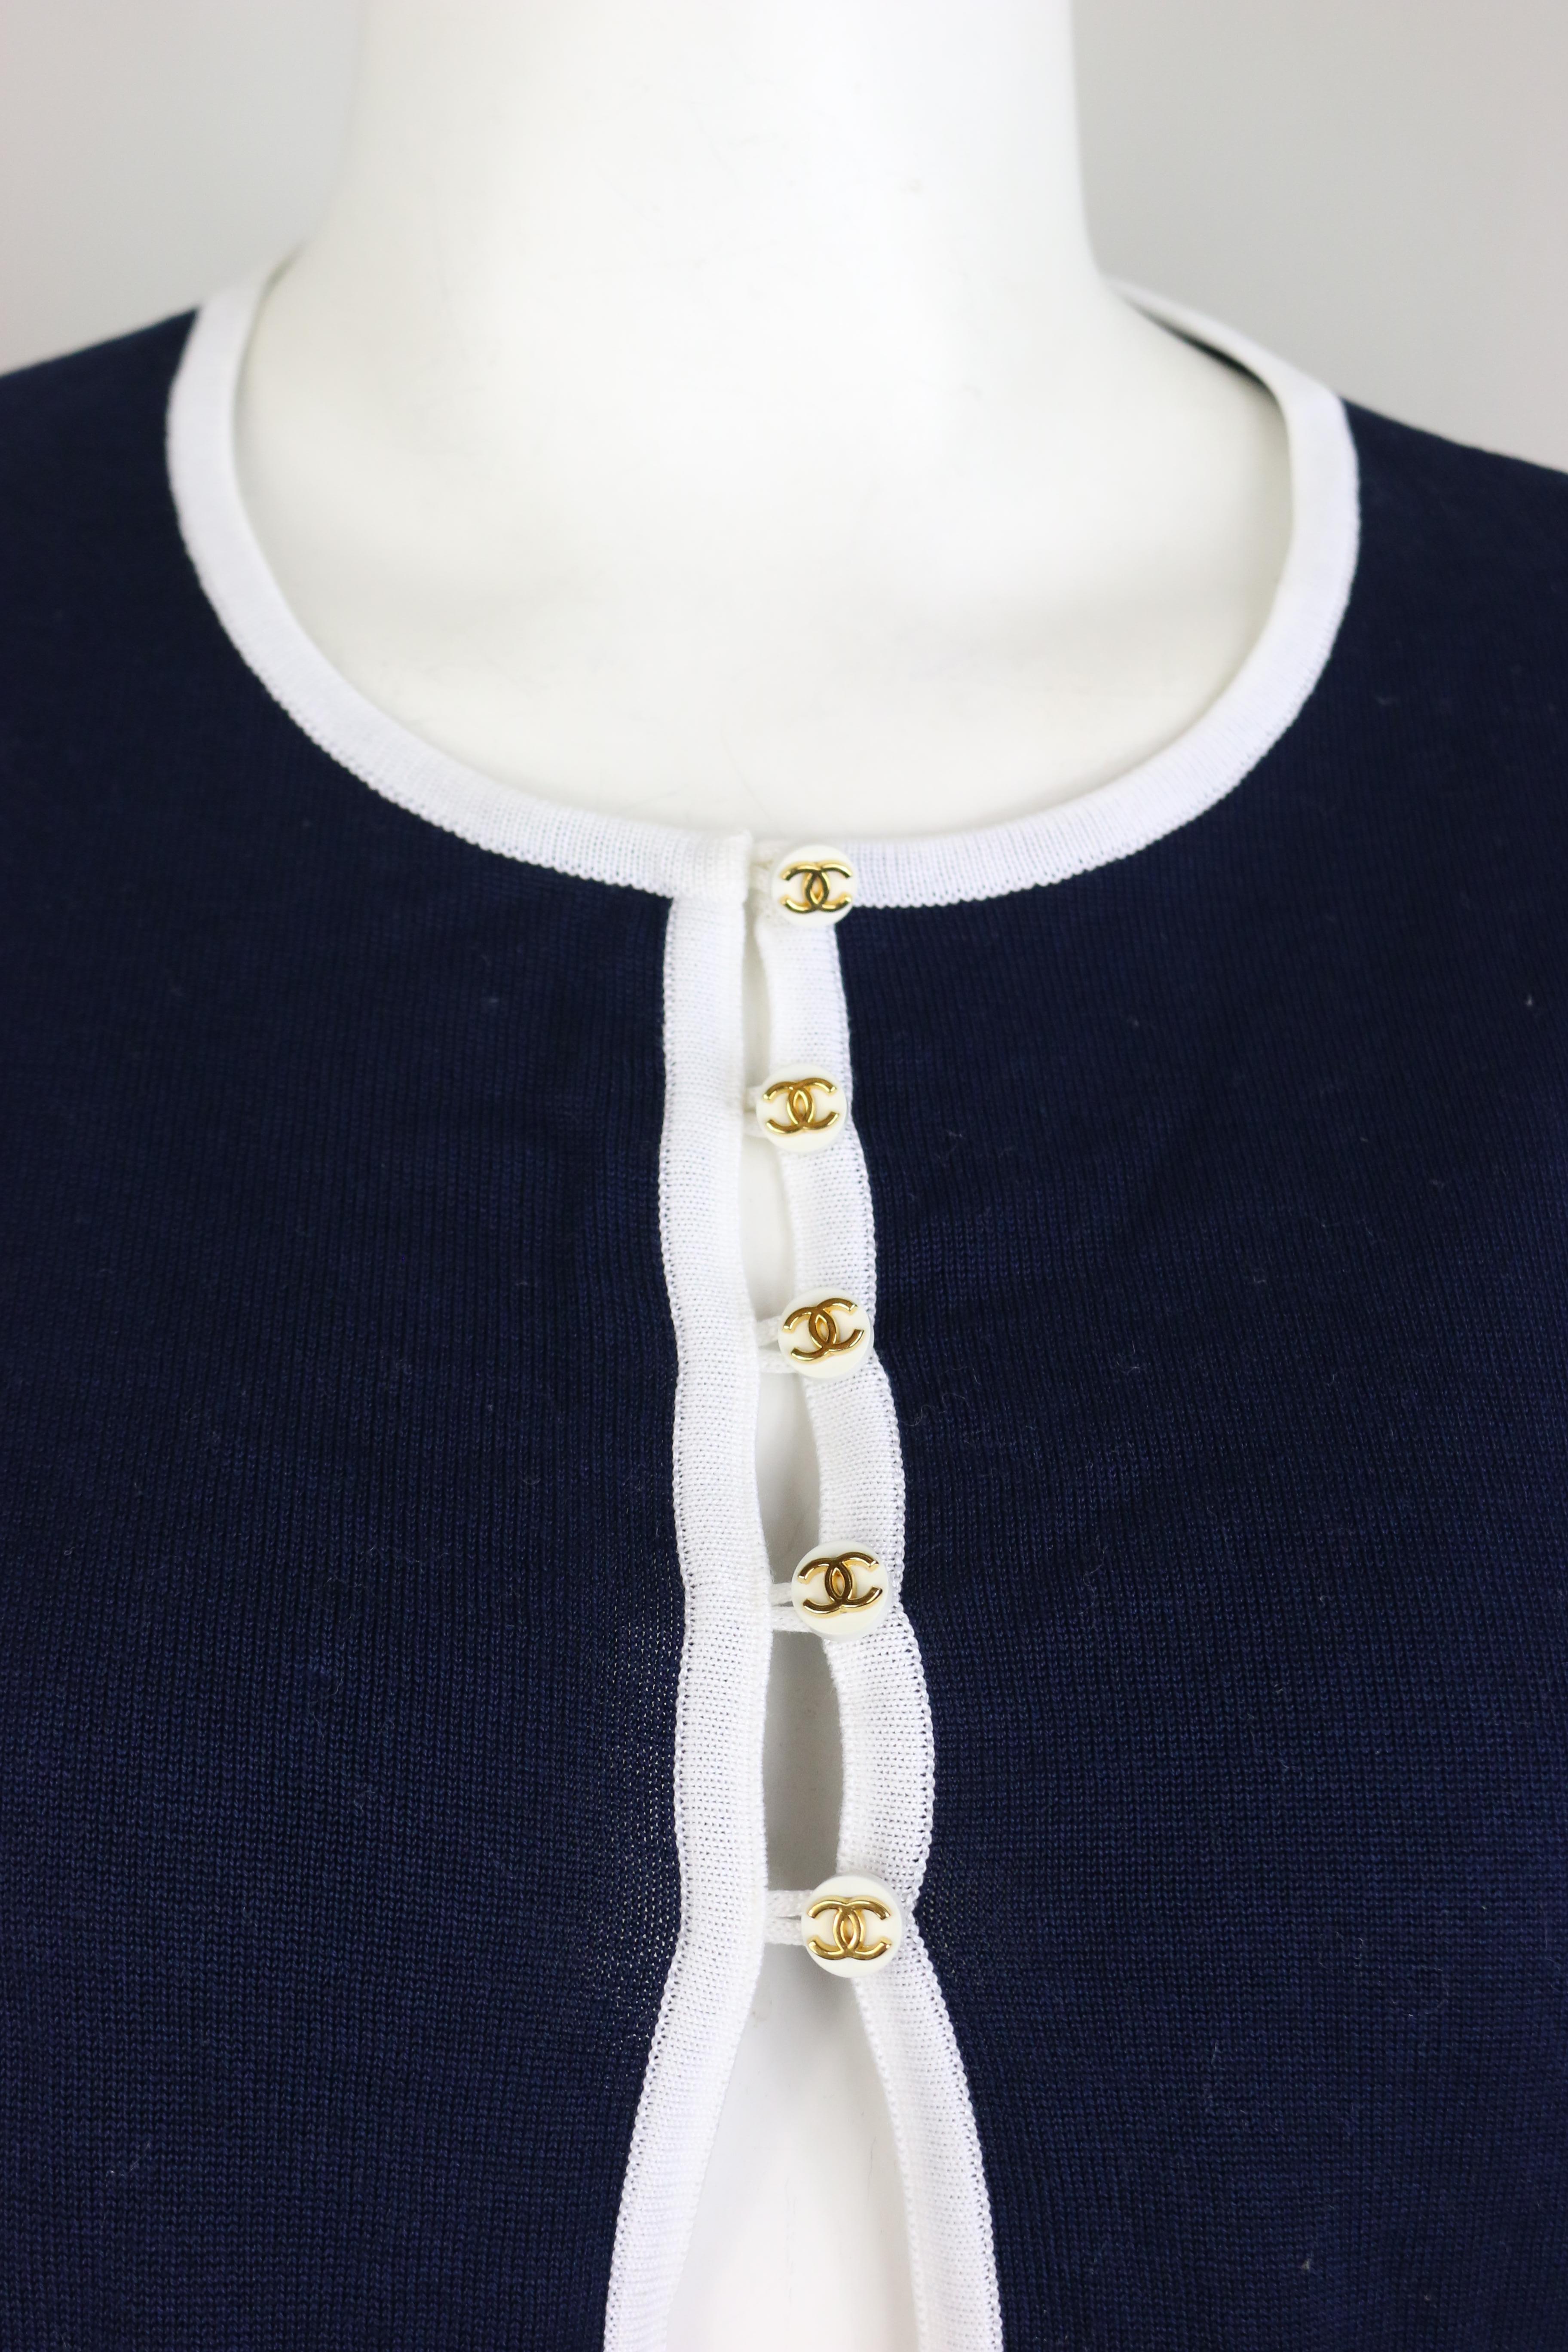 - Vintage Chanel navy with white piping trim cotton knitted cropped short sleeves cardigan top from 1996 spring collection. 

- Featuring gold-toned 